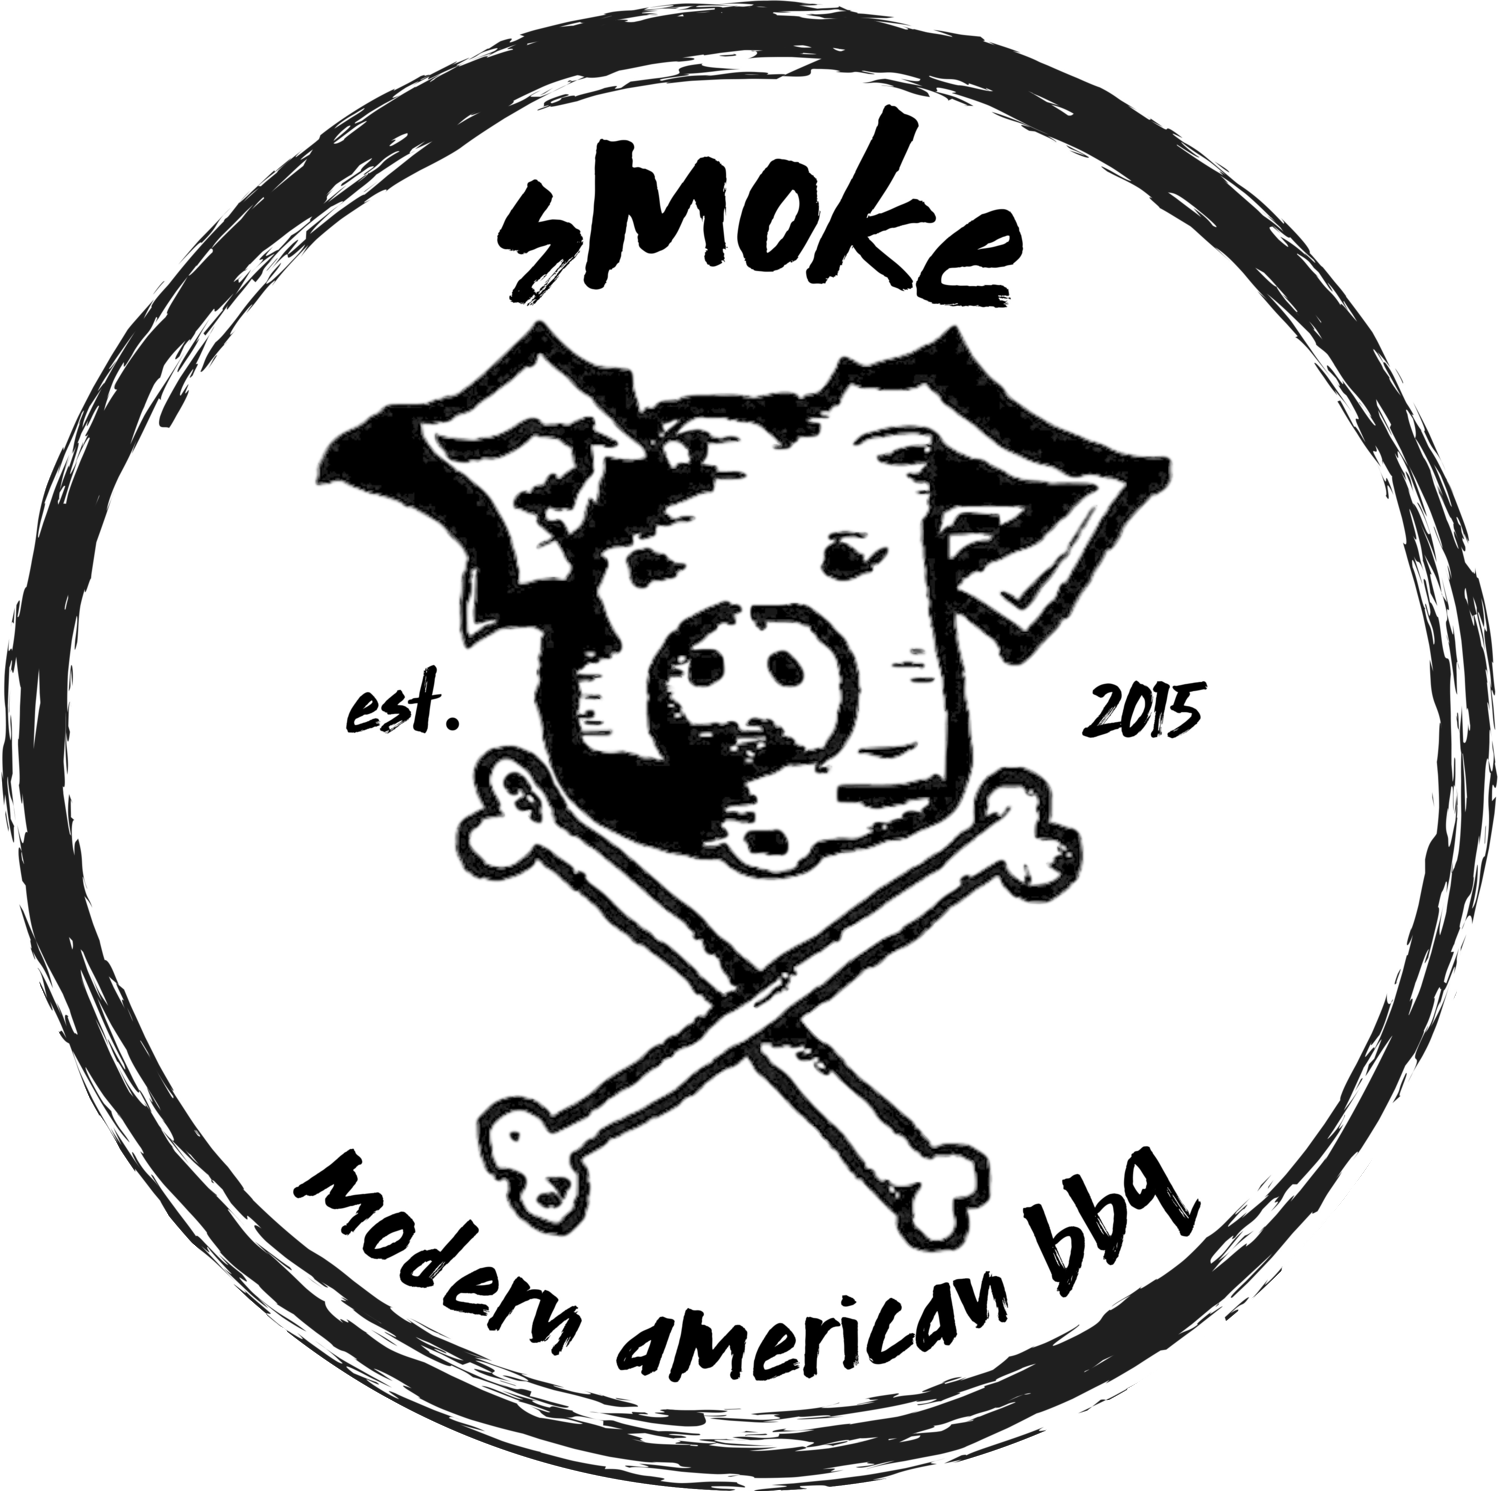 cookout clipart smoking grill